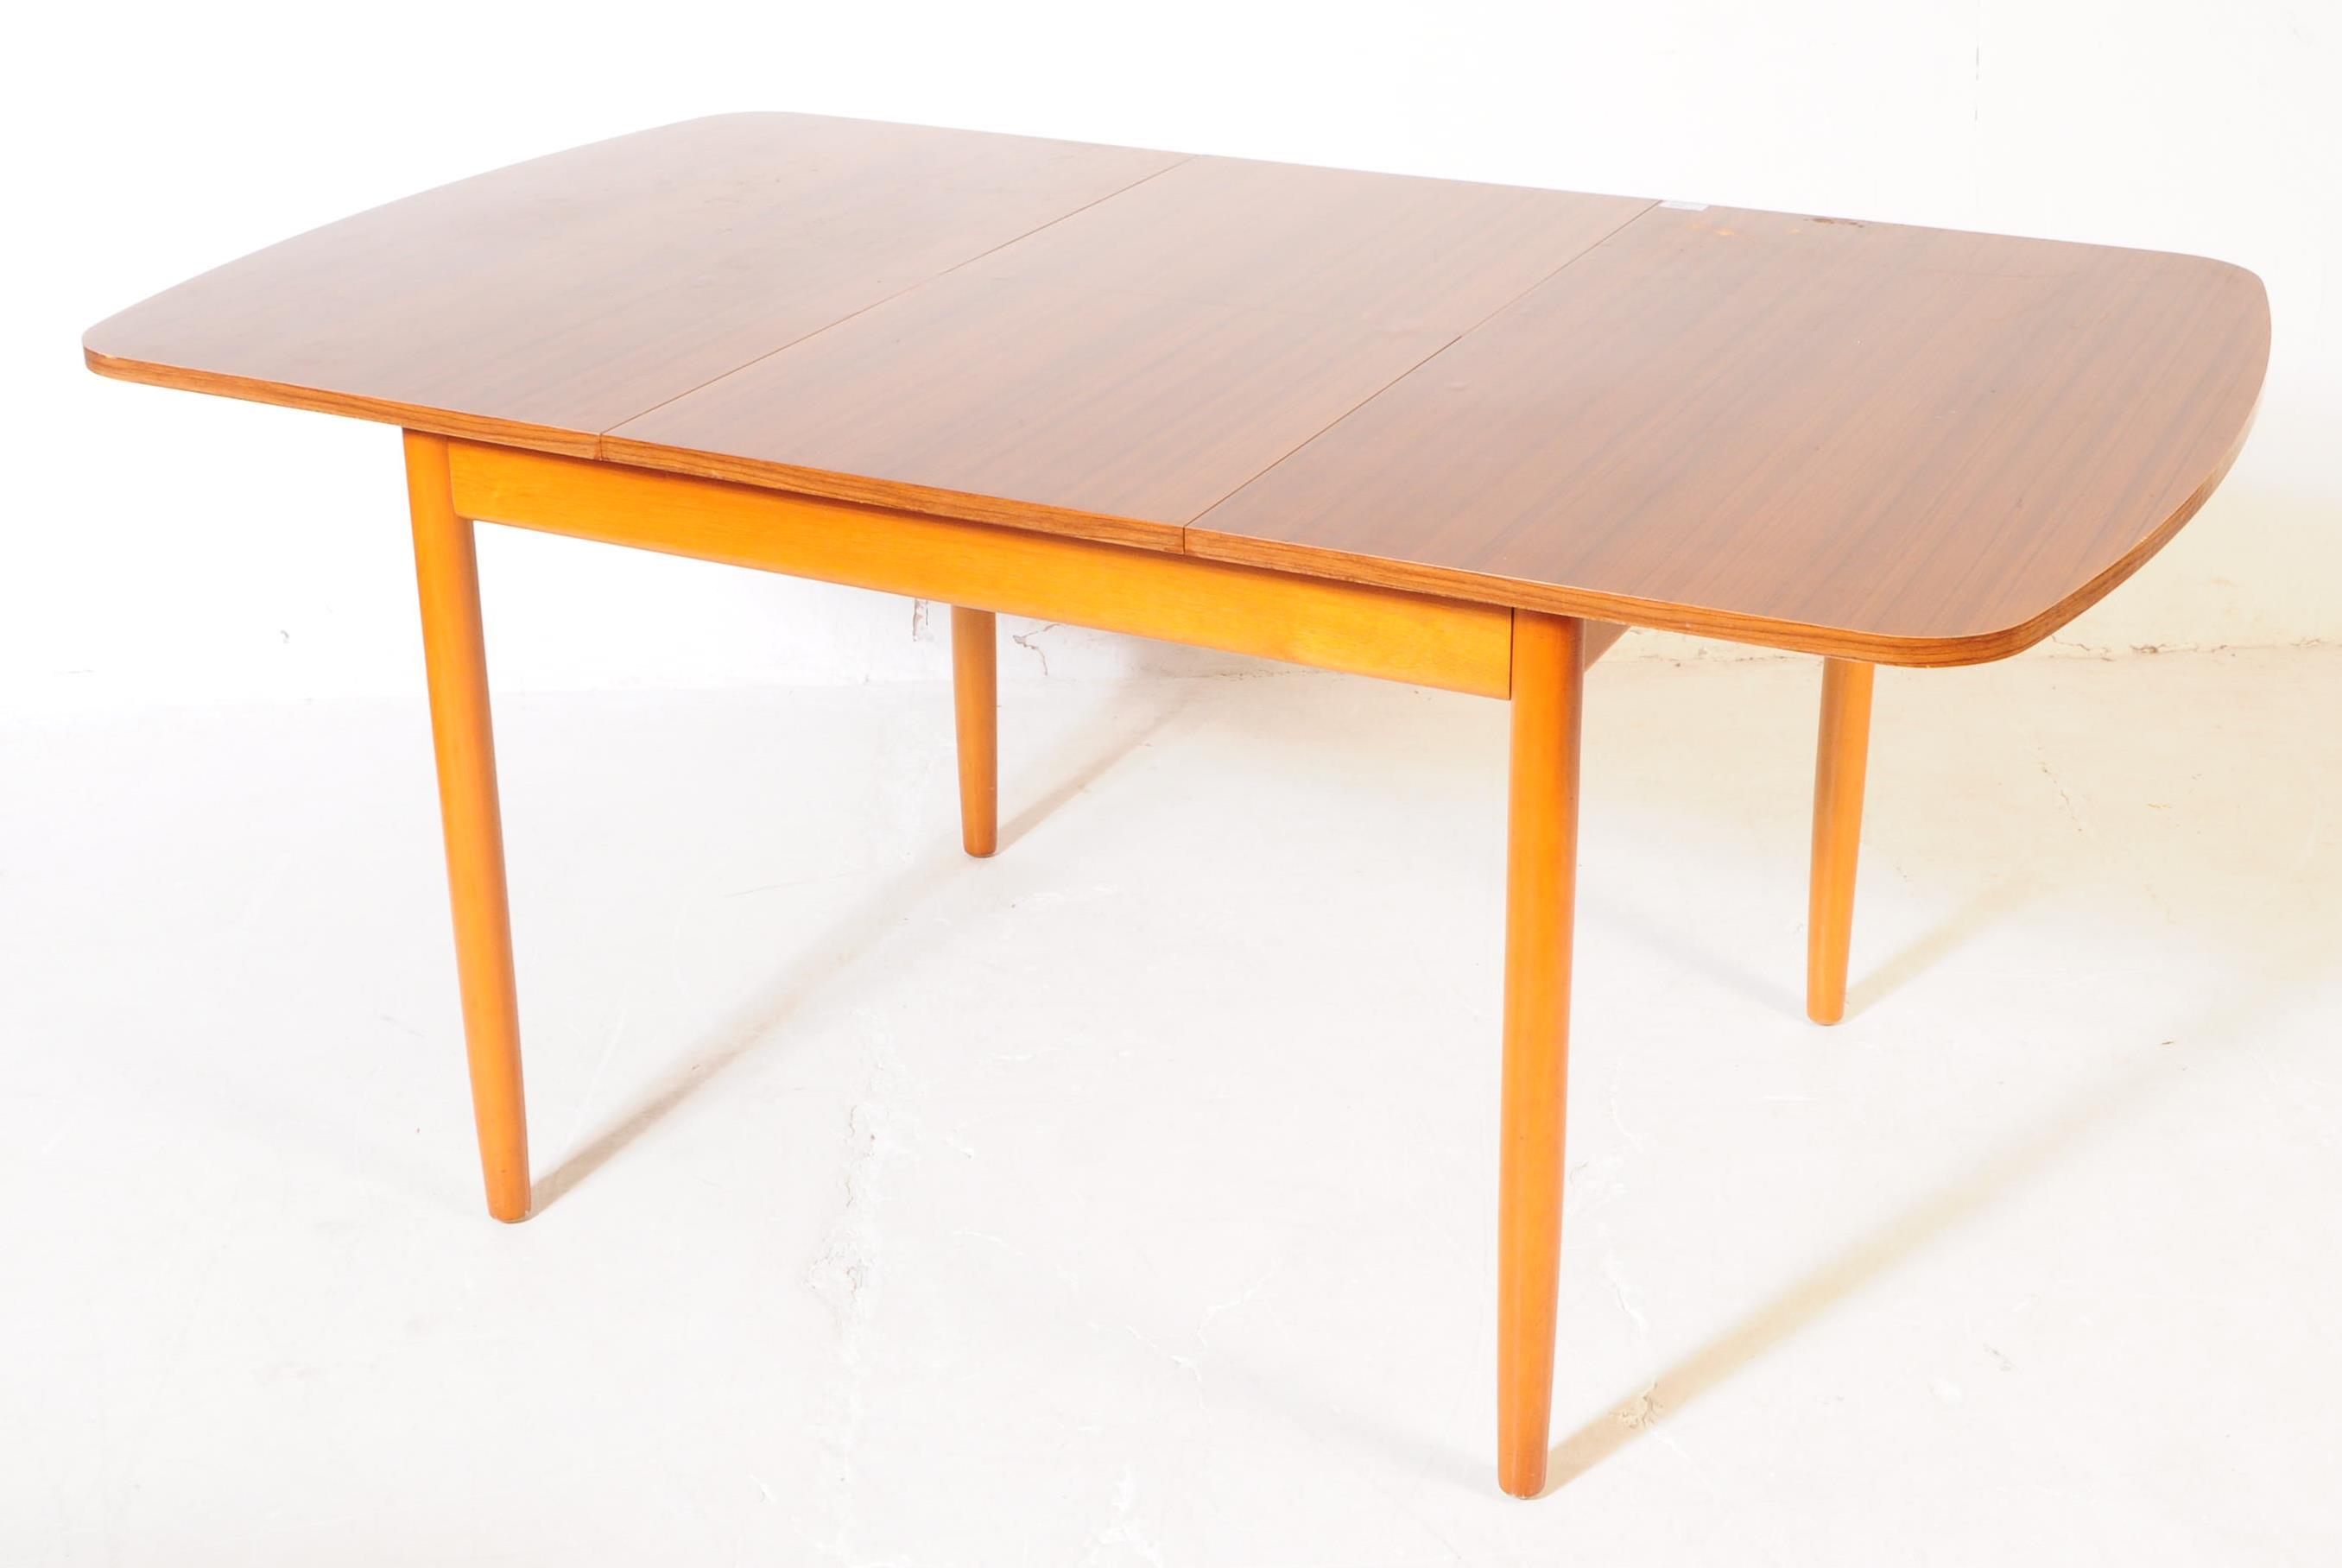 BRITISH MODERN DESIGN - MID CENTURY DINING TABLE & CHAIRS - Image 4 of 7